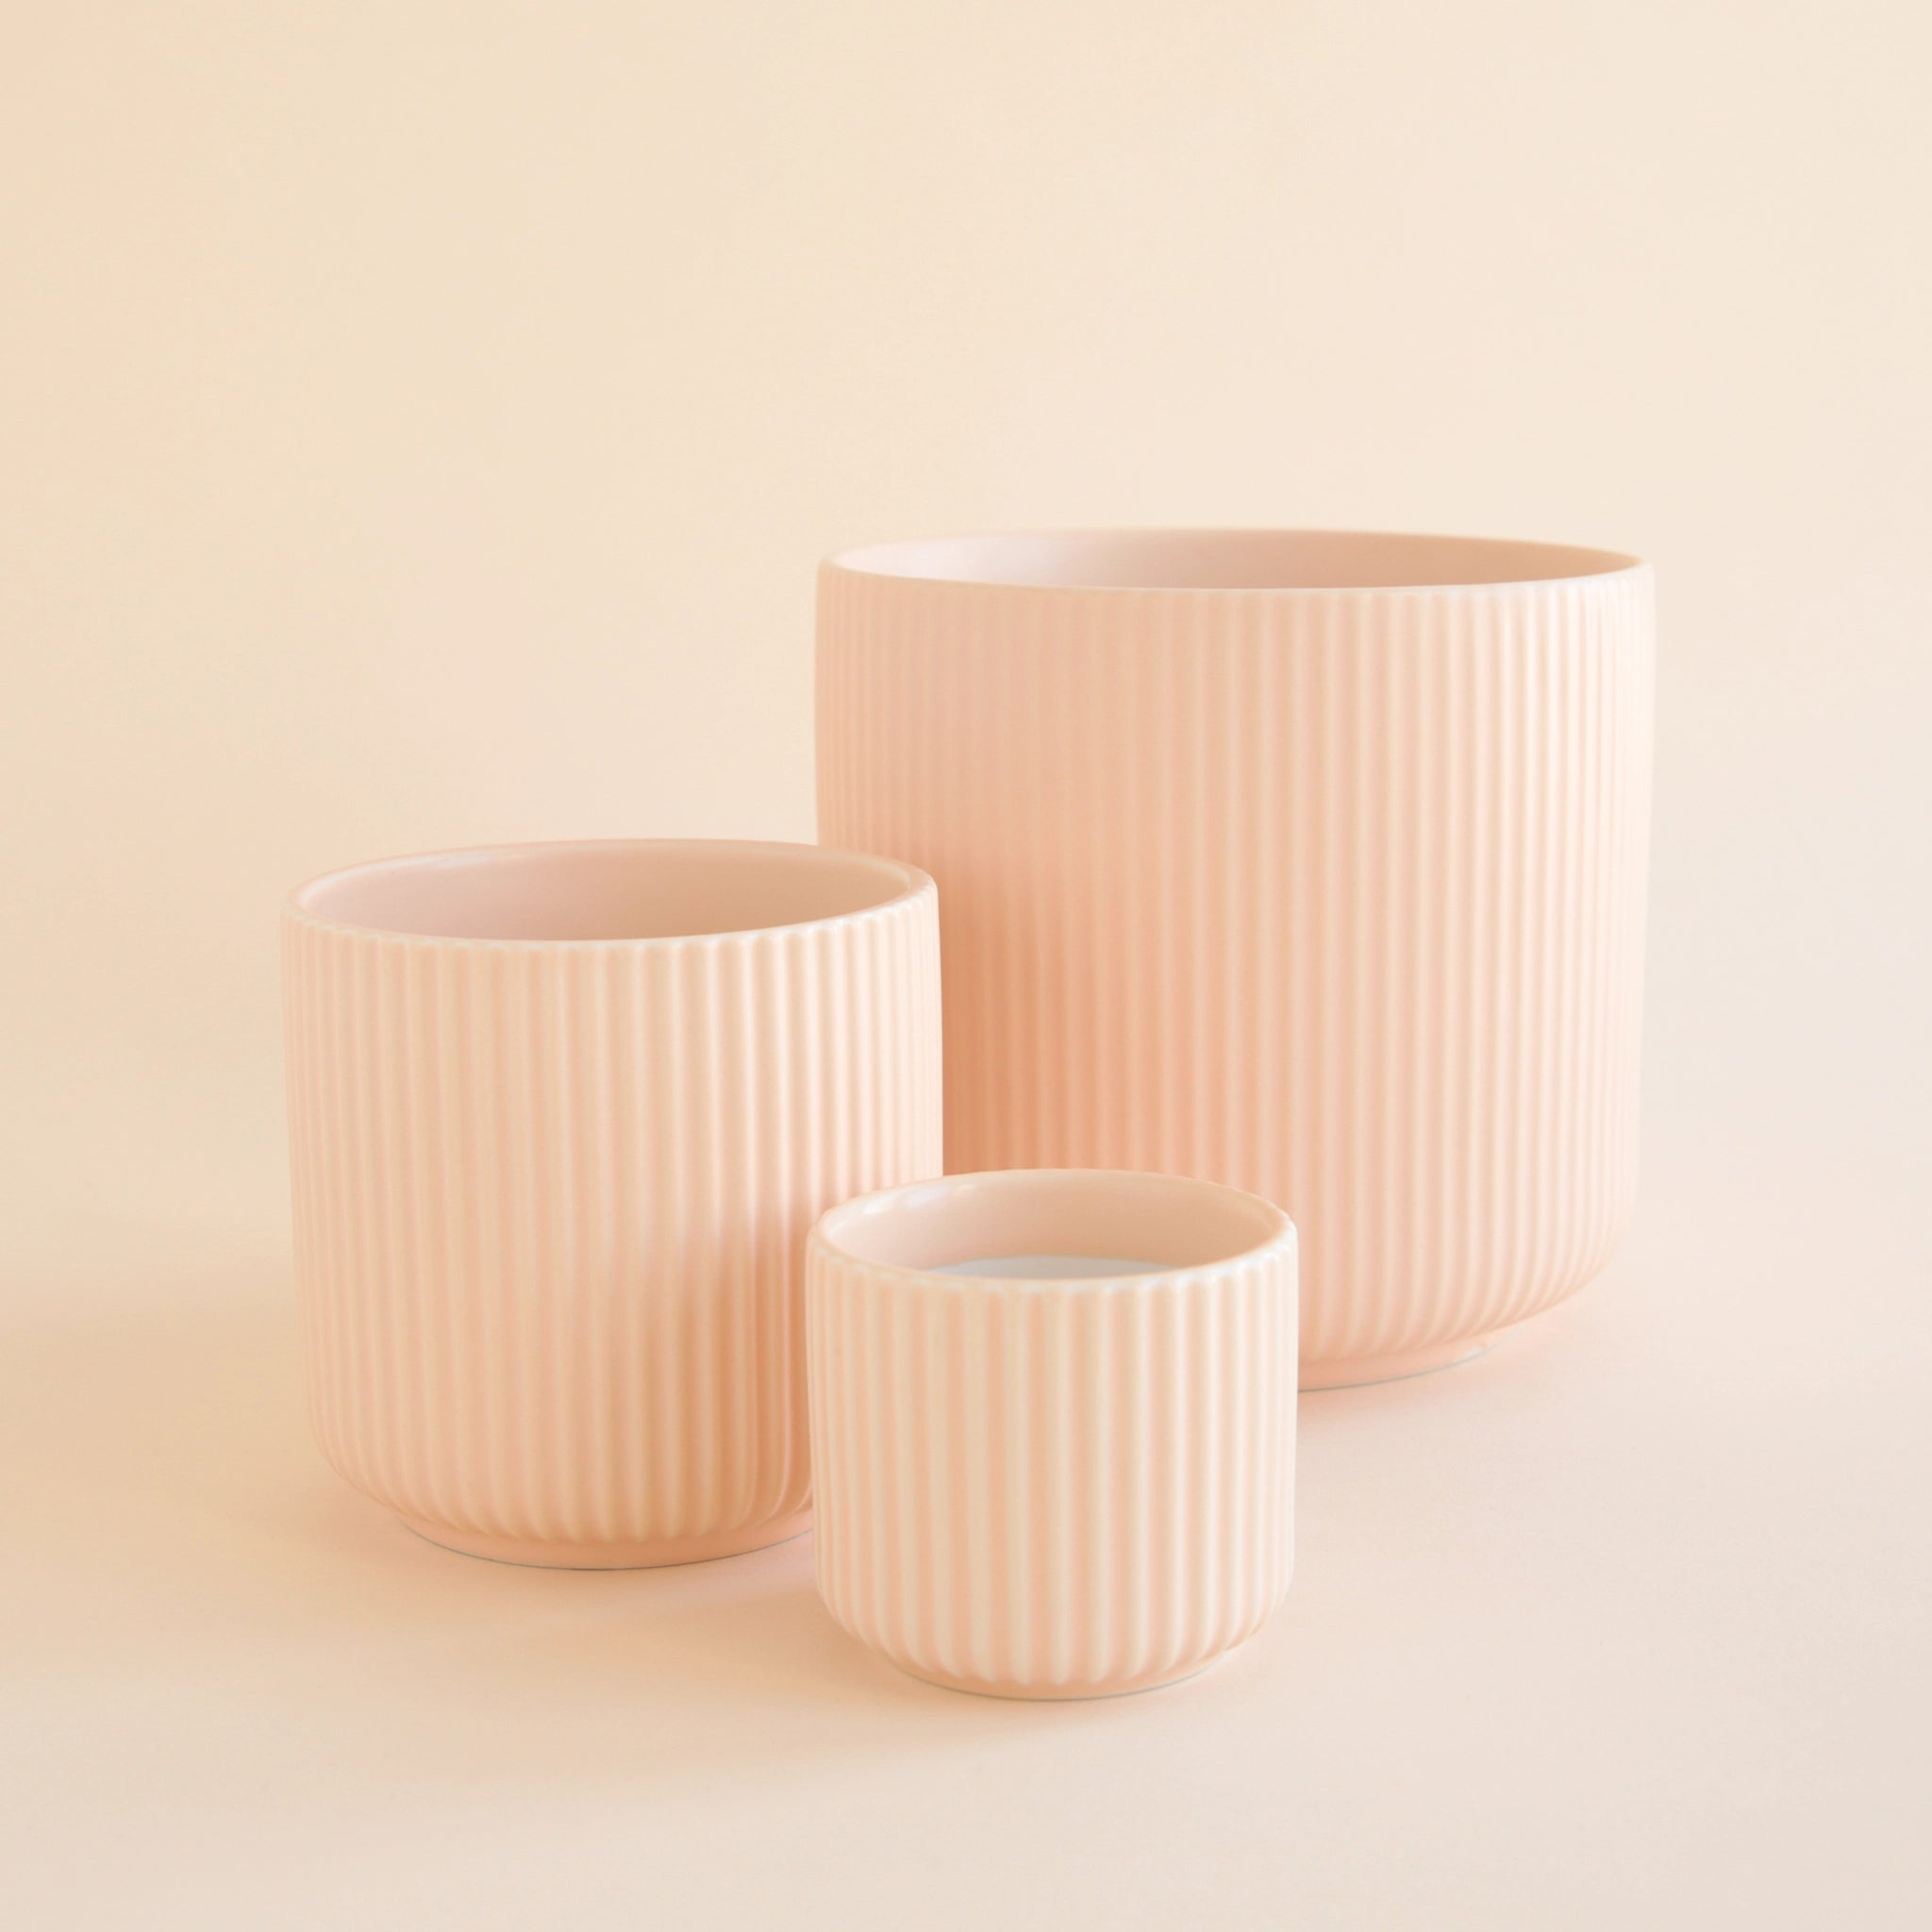 On an ivory background is three different sized pink ceramic planters with fluting and a rounded base.